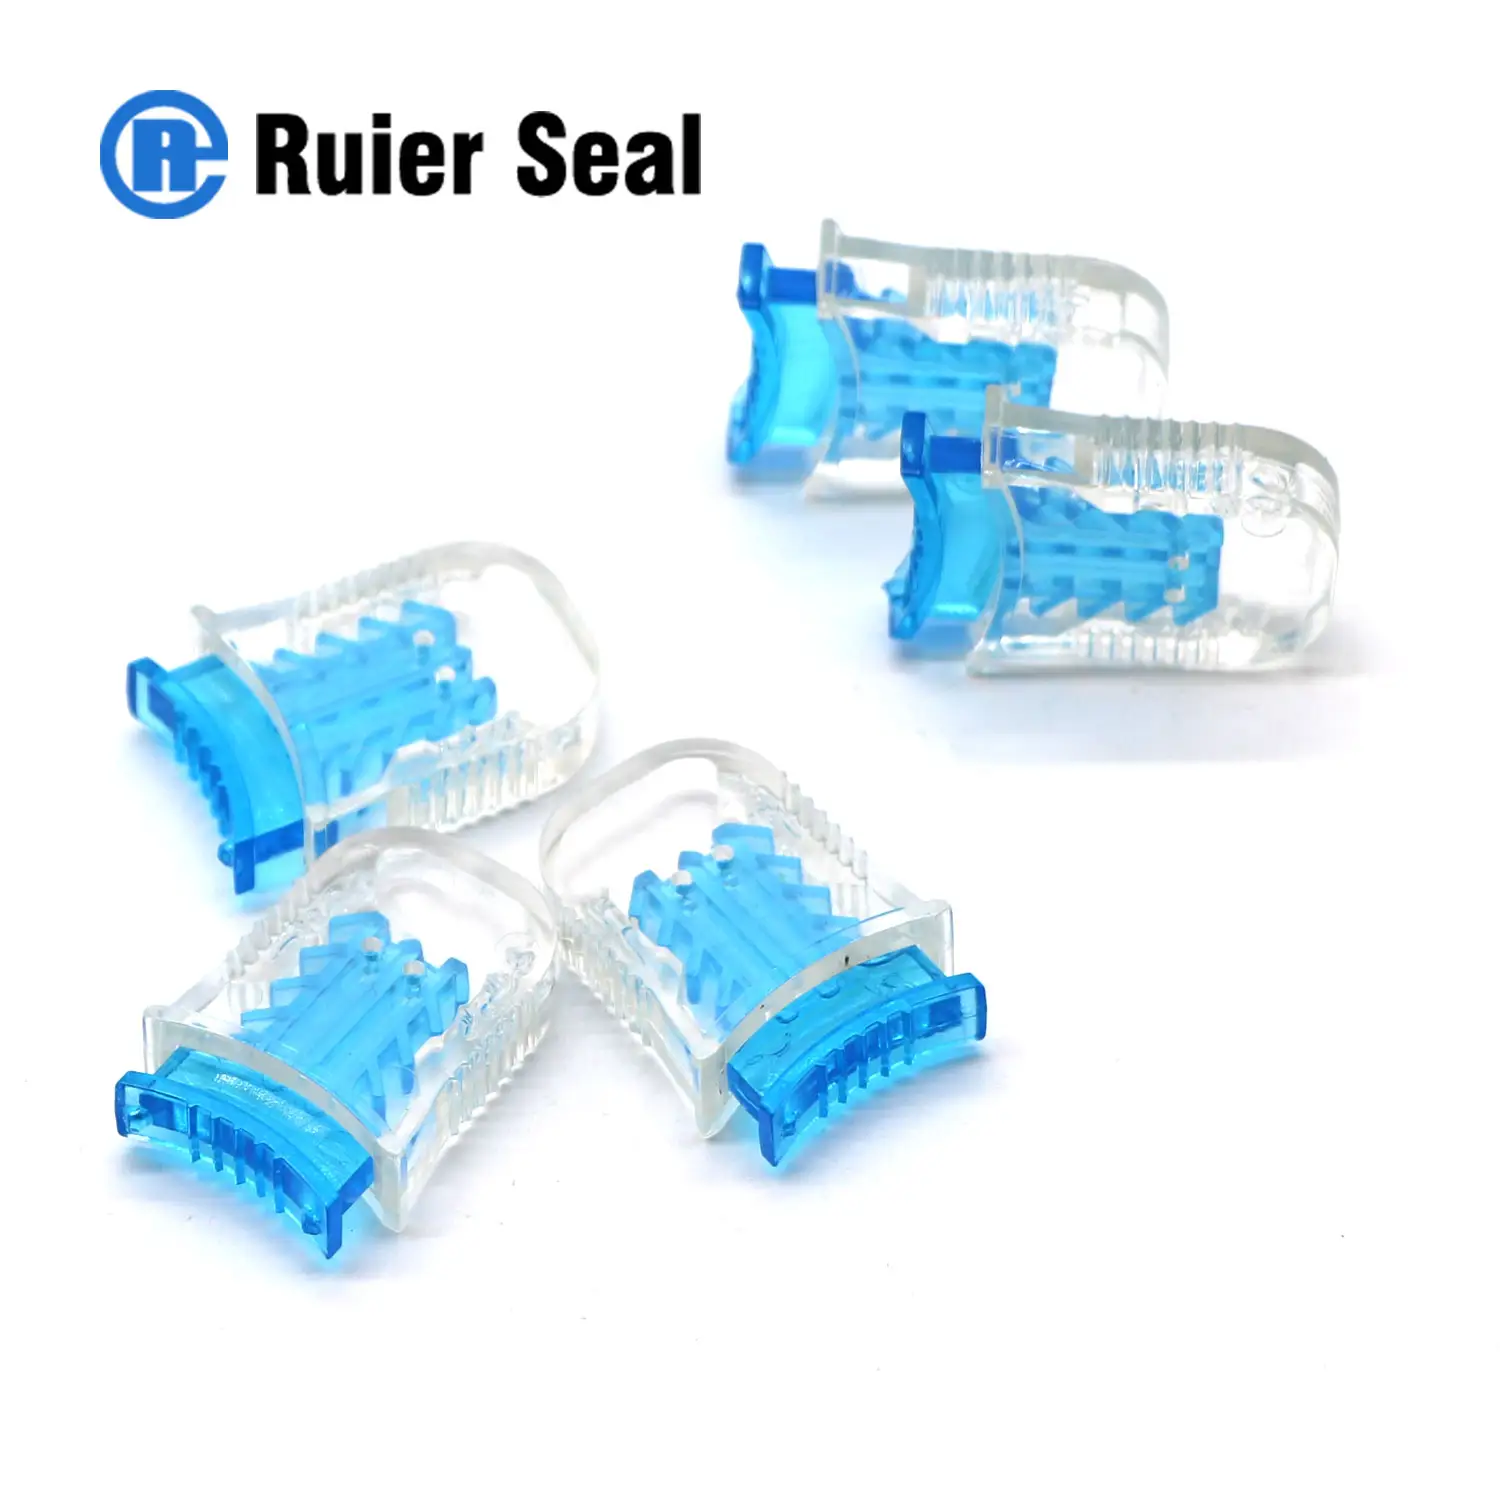 REM101 safety pin water meter seal with copper wire meter seals suppliers plastic electricity meter seals